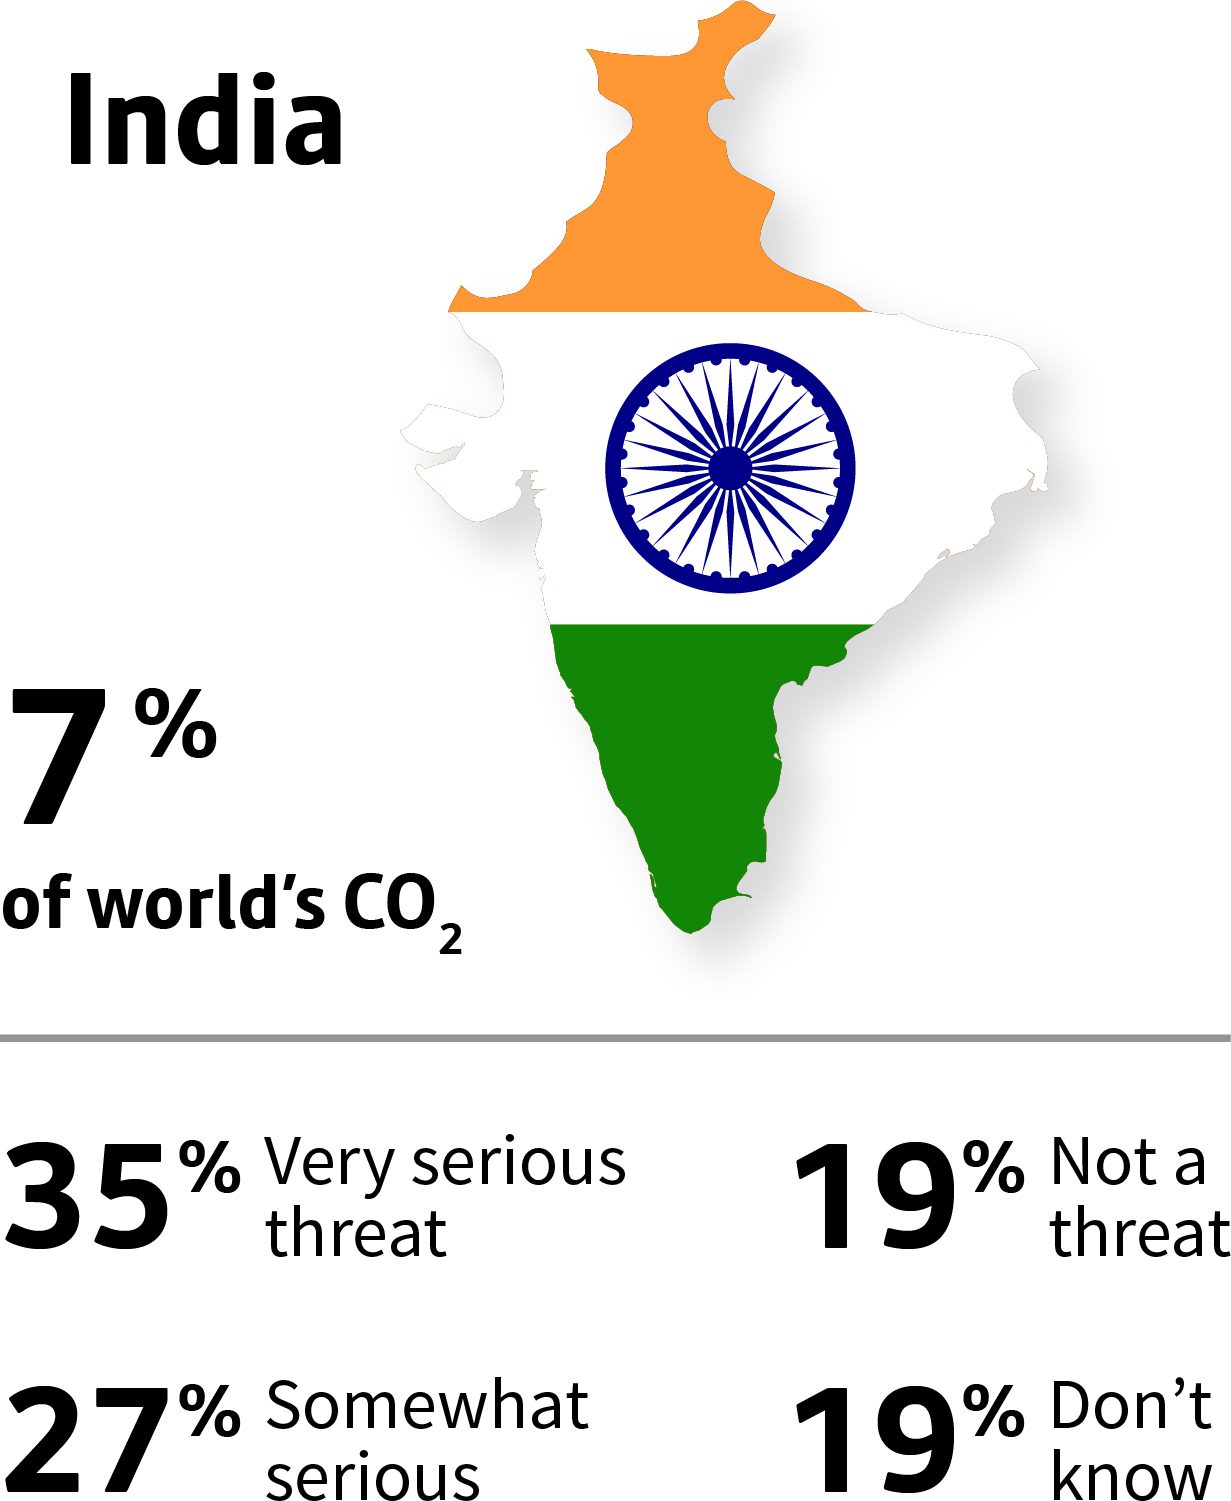 The world’s biggest polluters-India